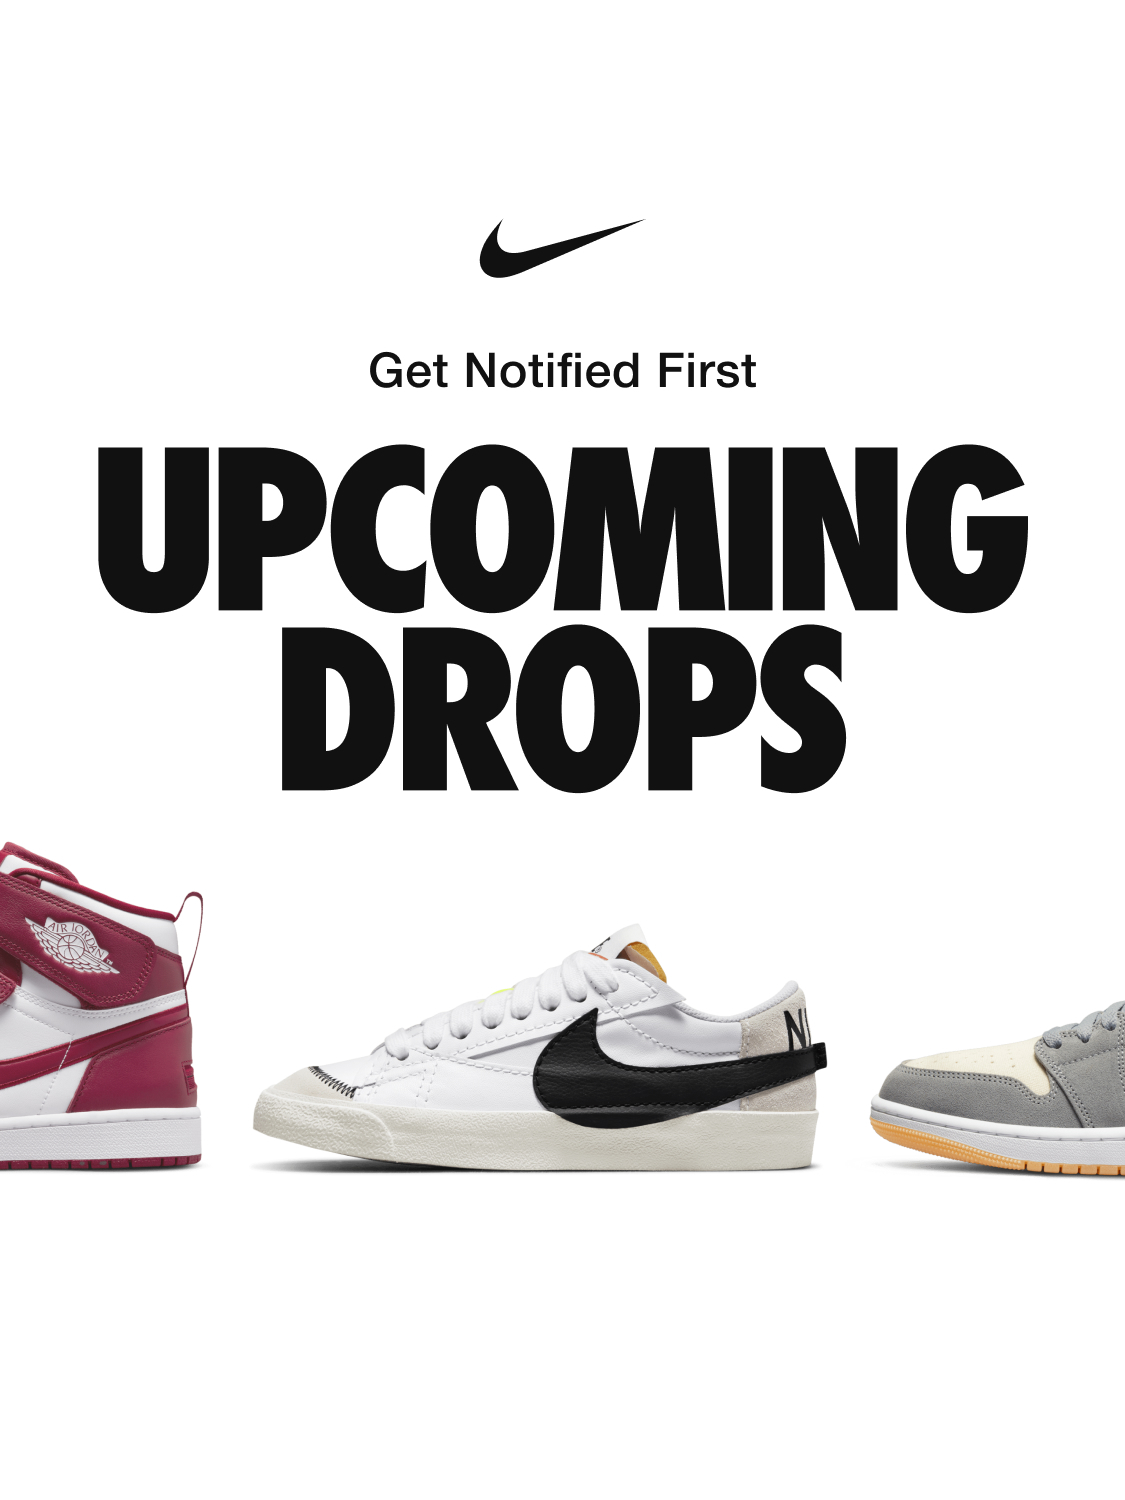 prestar Todo el mundo Peticionario Nike.com on Twitter: "Upcoming Drops. Featuring a Jumbo change on a classic  design. Check out what's dropping soon. 🇺🇸 https://t.co/VcQsemWgFN  https://t.co/GeAcbcUWNv" / Twitter